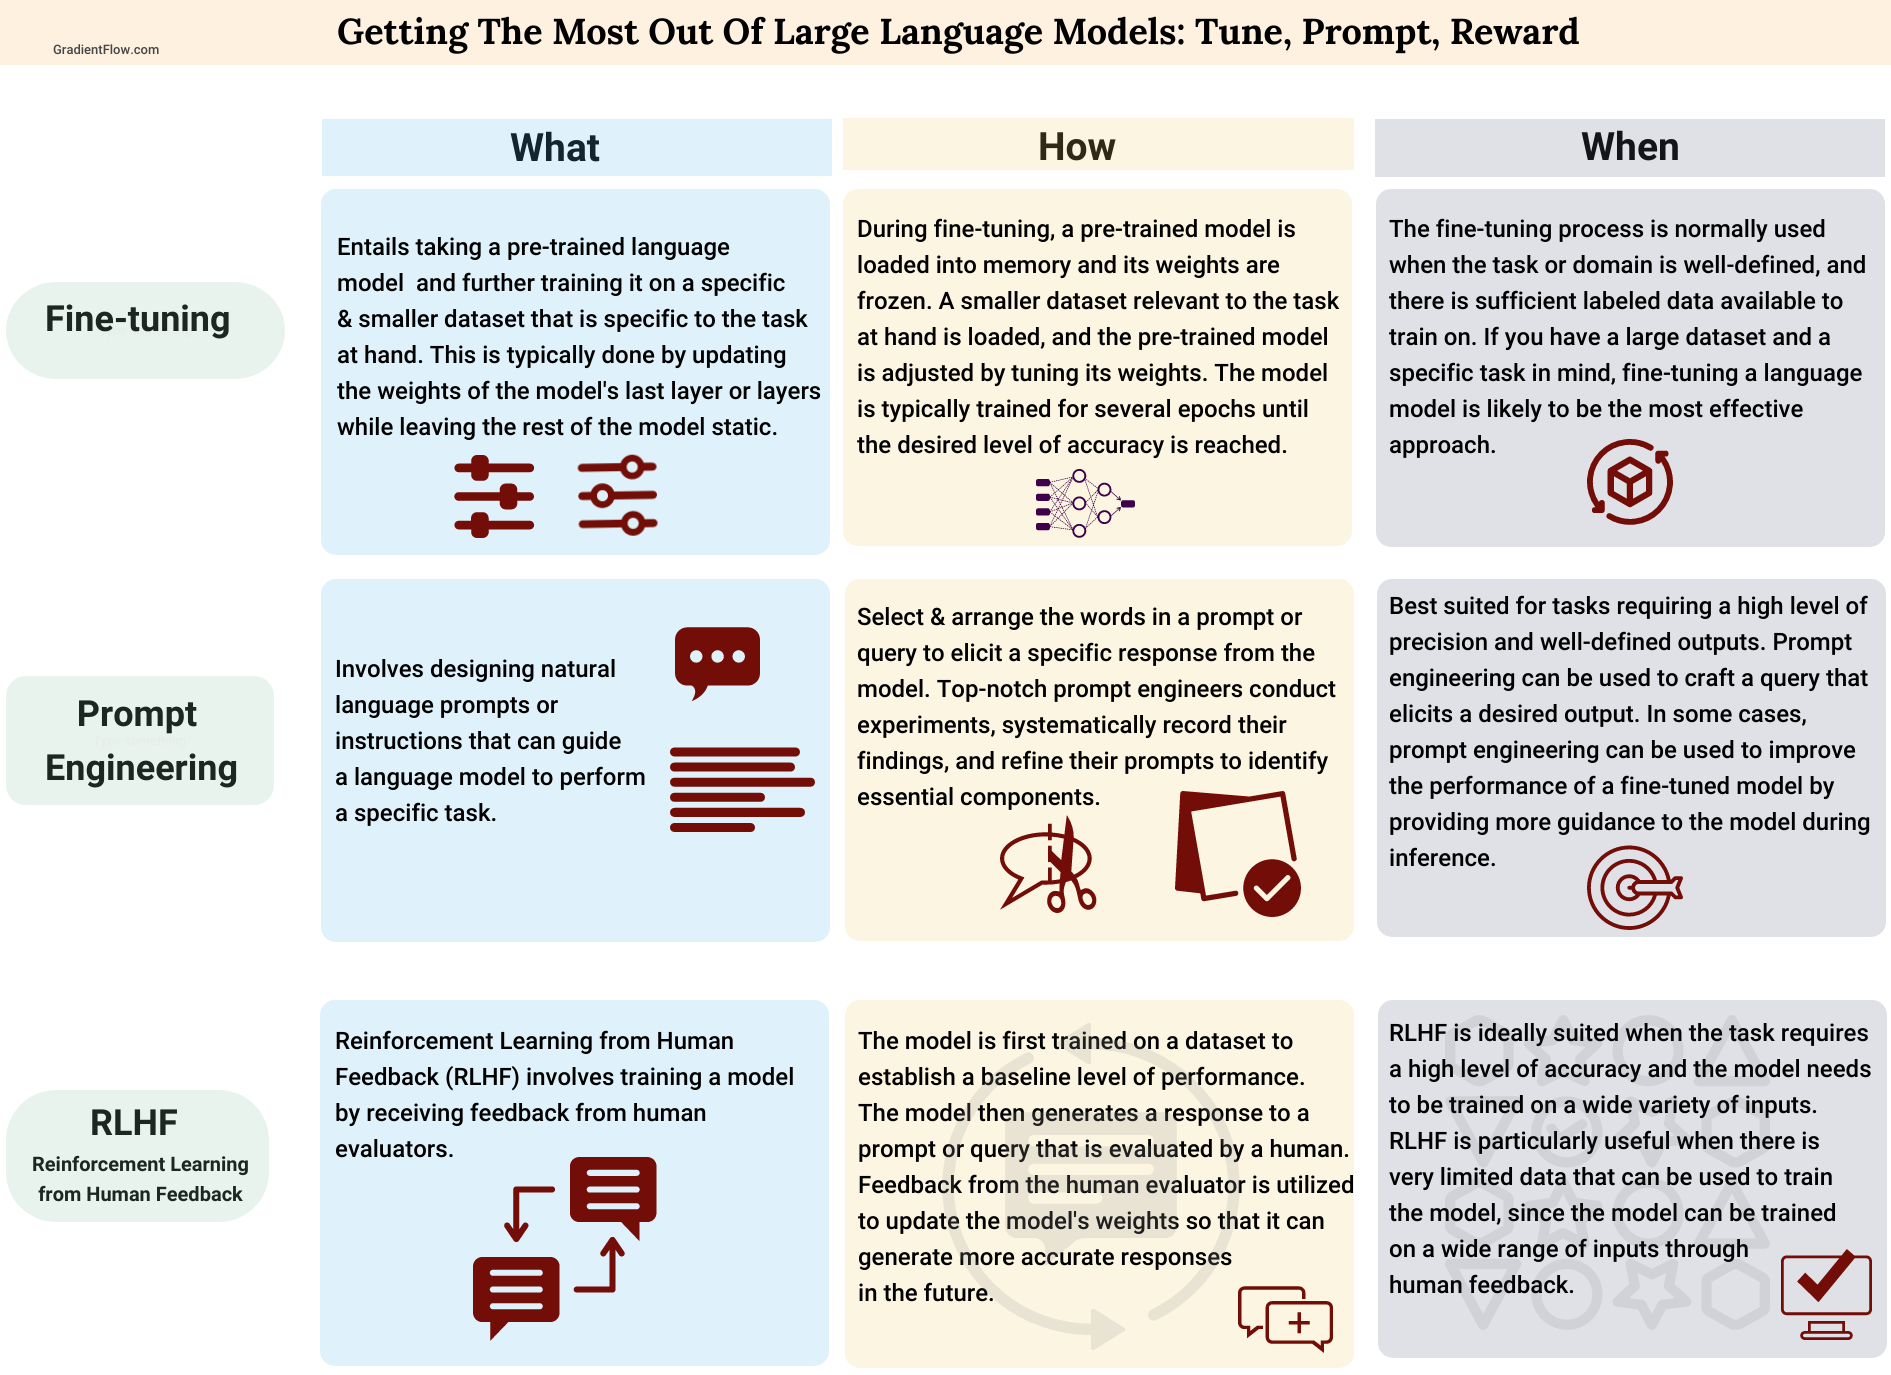 Unveiling the Power of Large Language Models (LLMs)